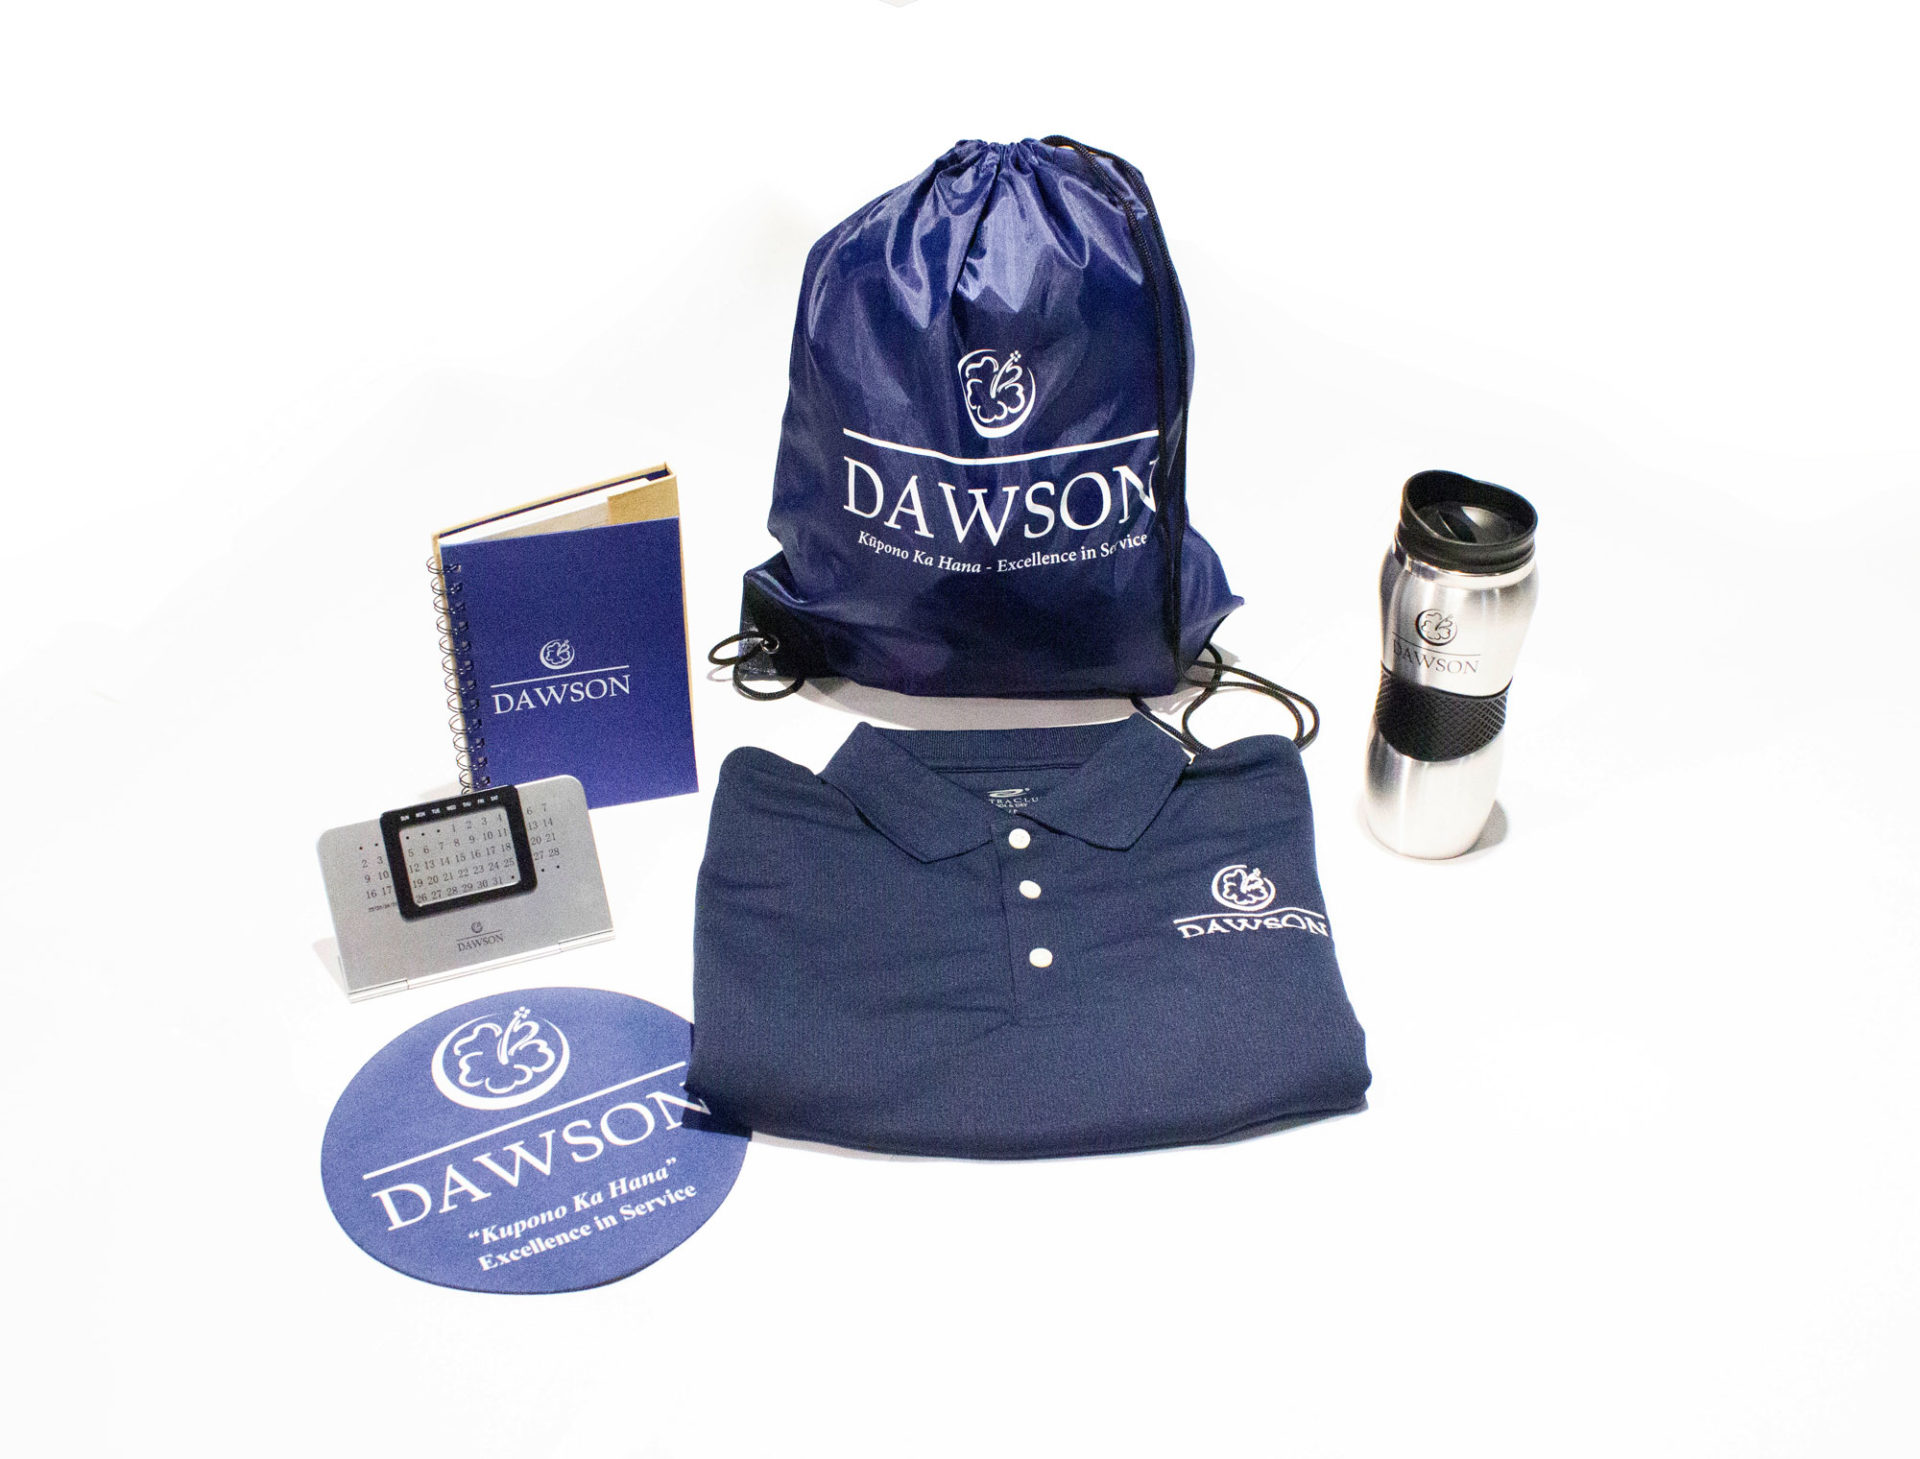 Custom Branded backpack, shirt, cup, mouse pad, notebook, calendar, and pen